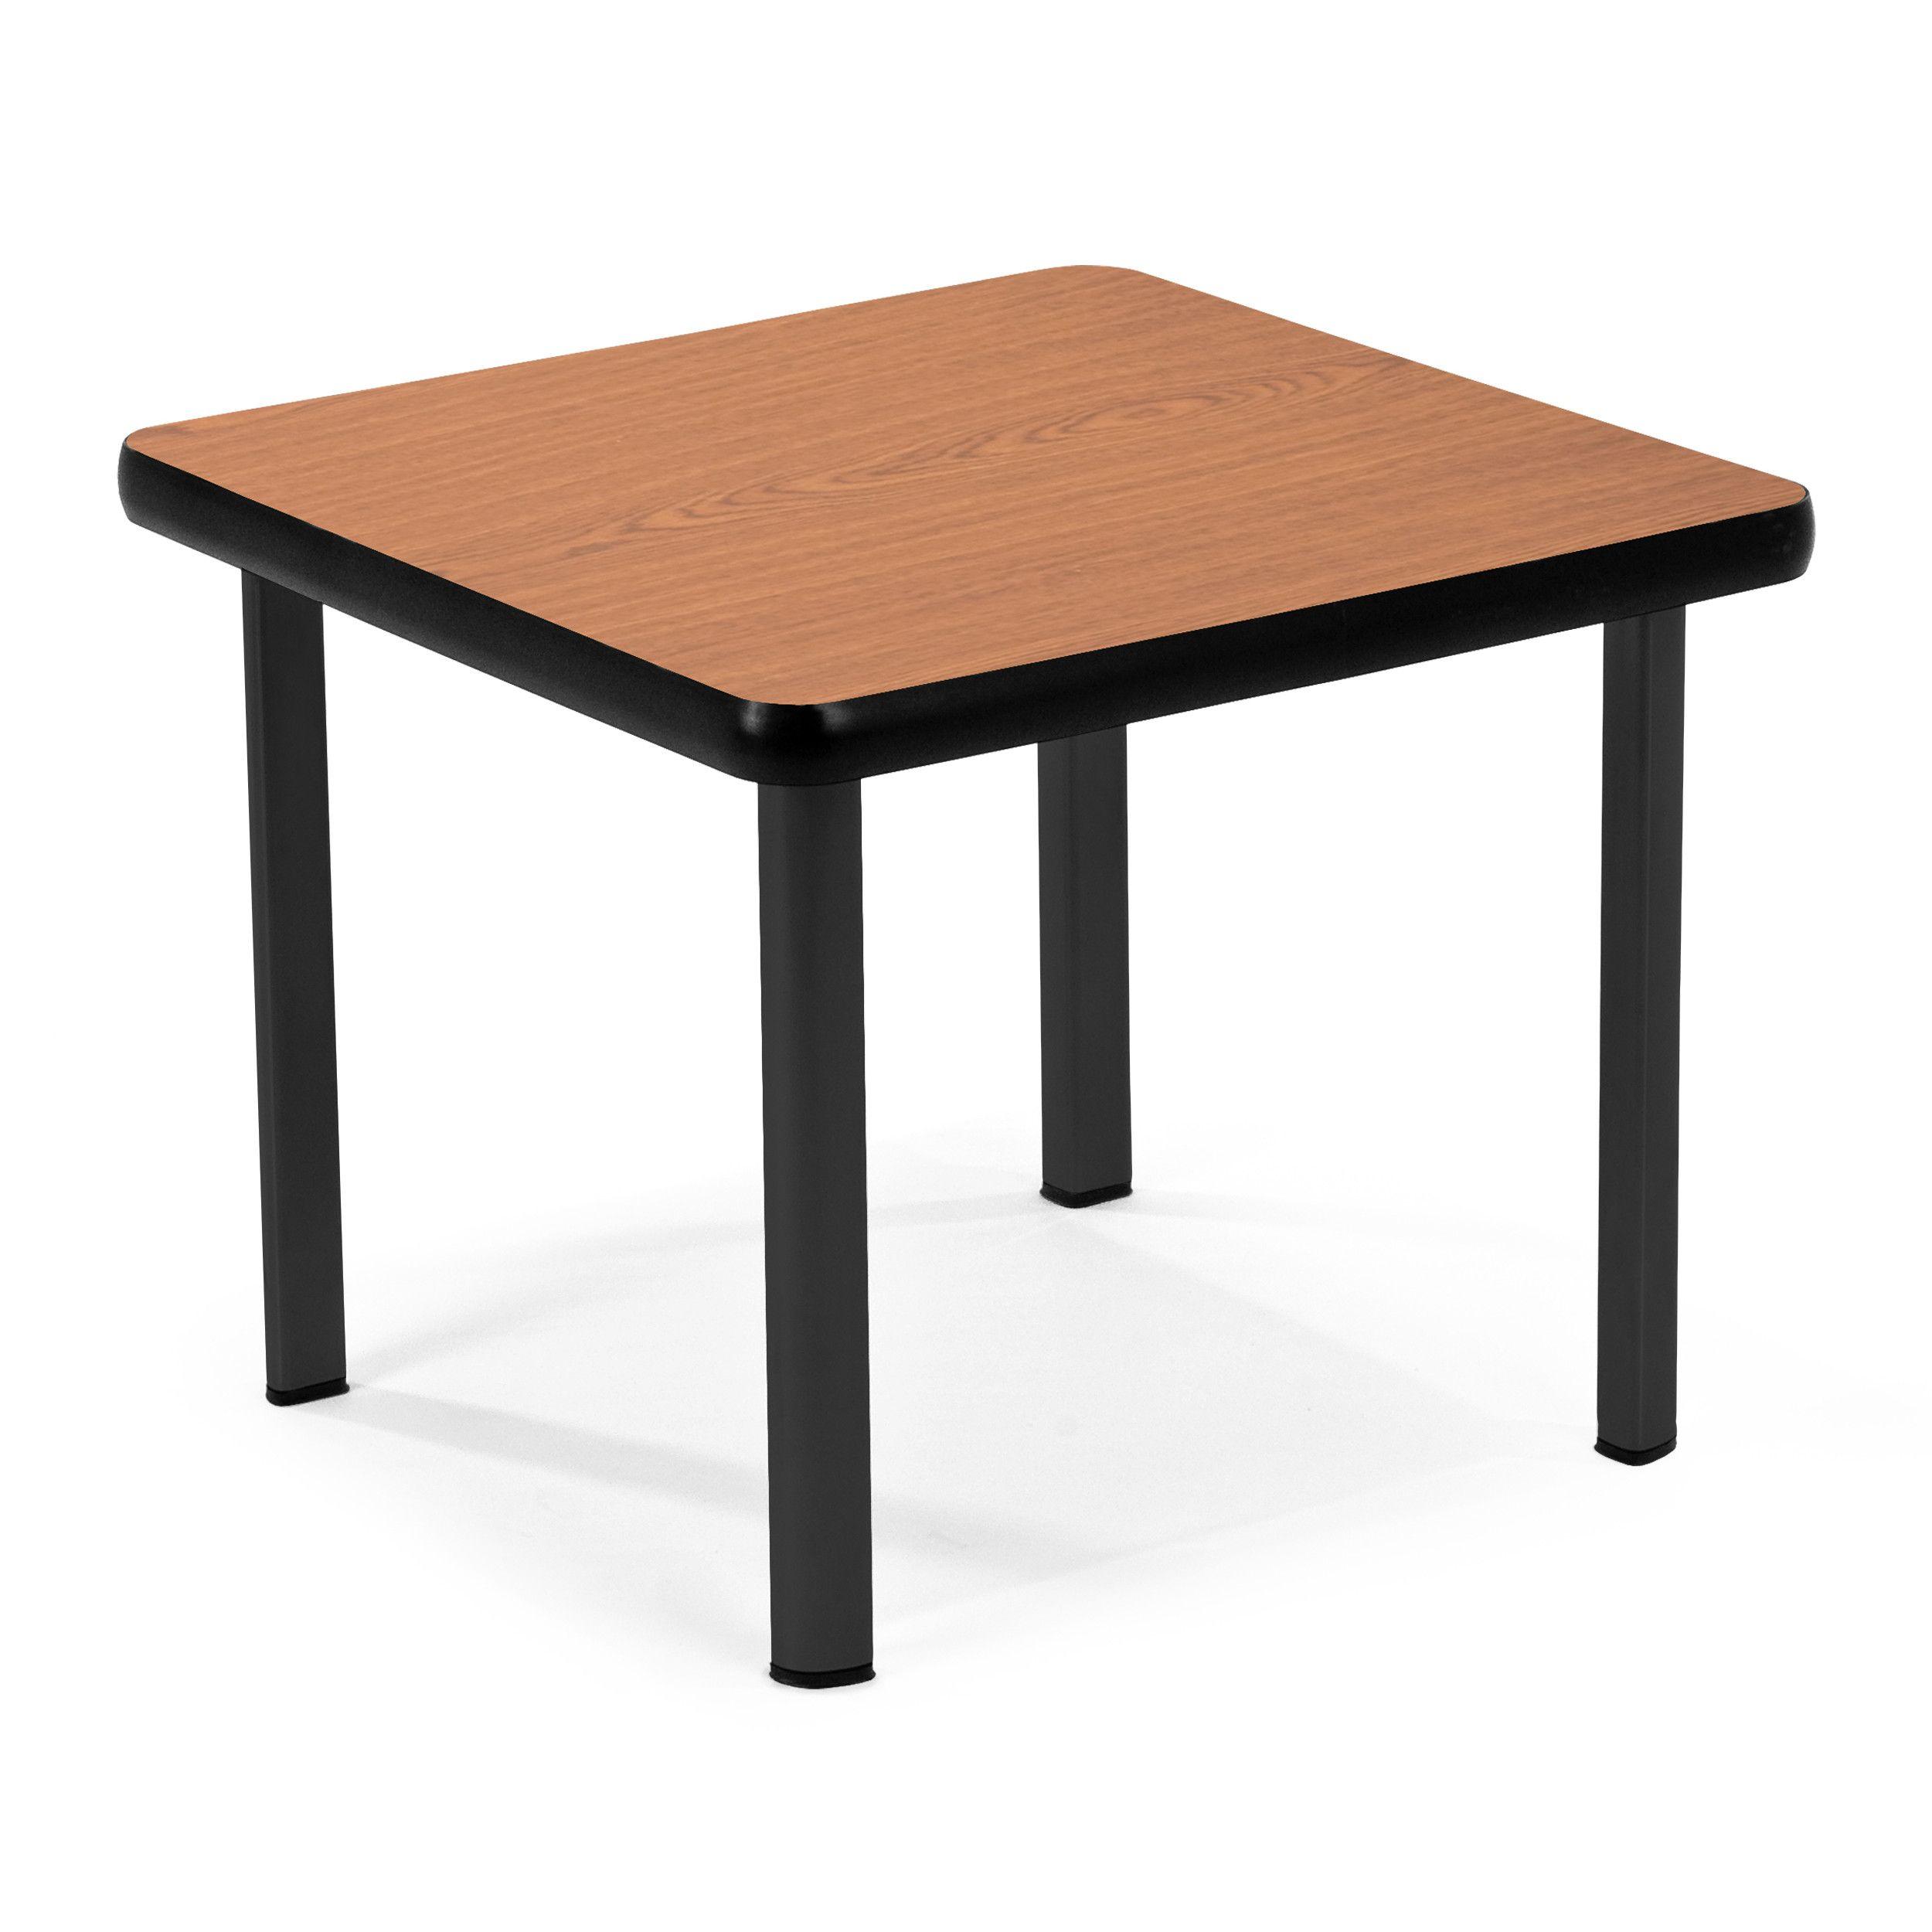 Wayfair Square Logo - OFM 139 8quot Square Conference Table Reviews Wayfair Supply ...